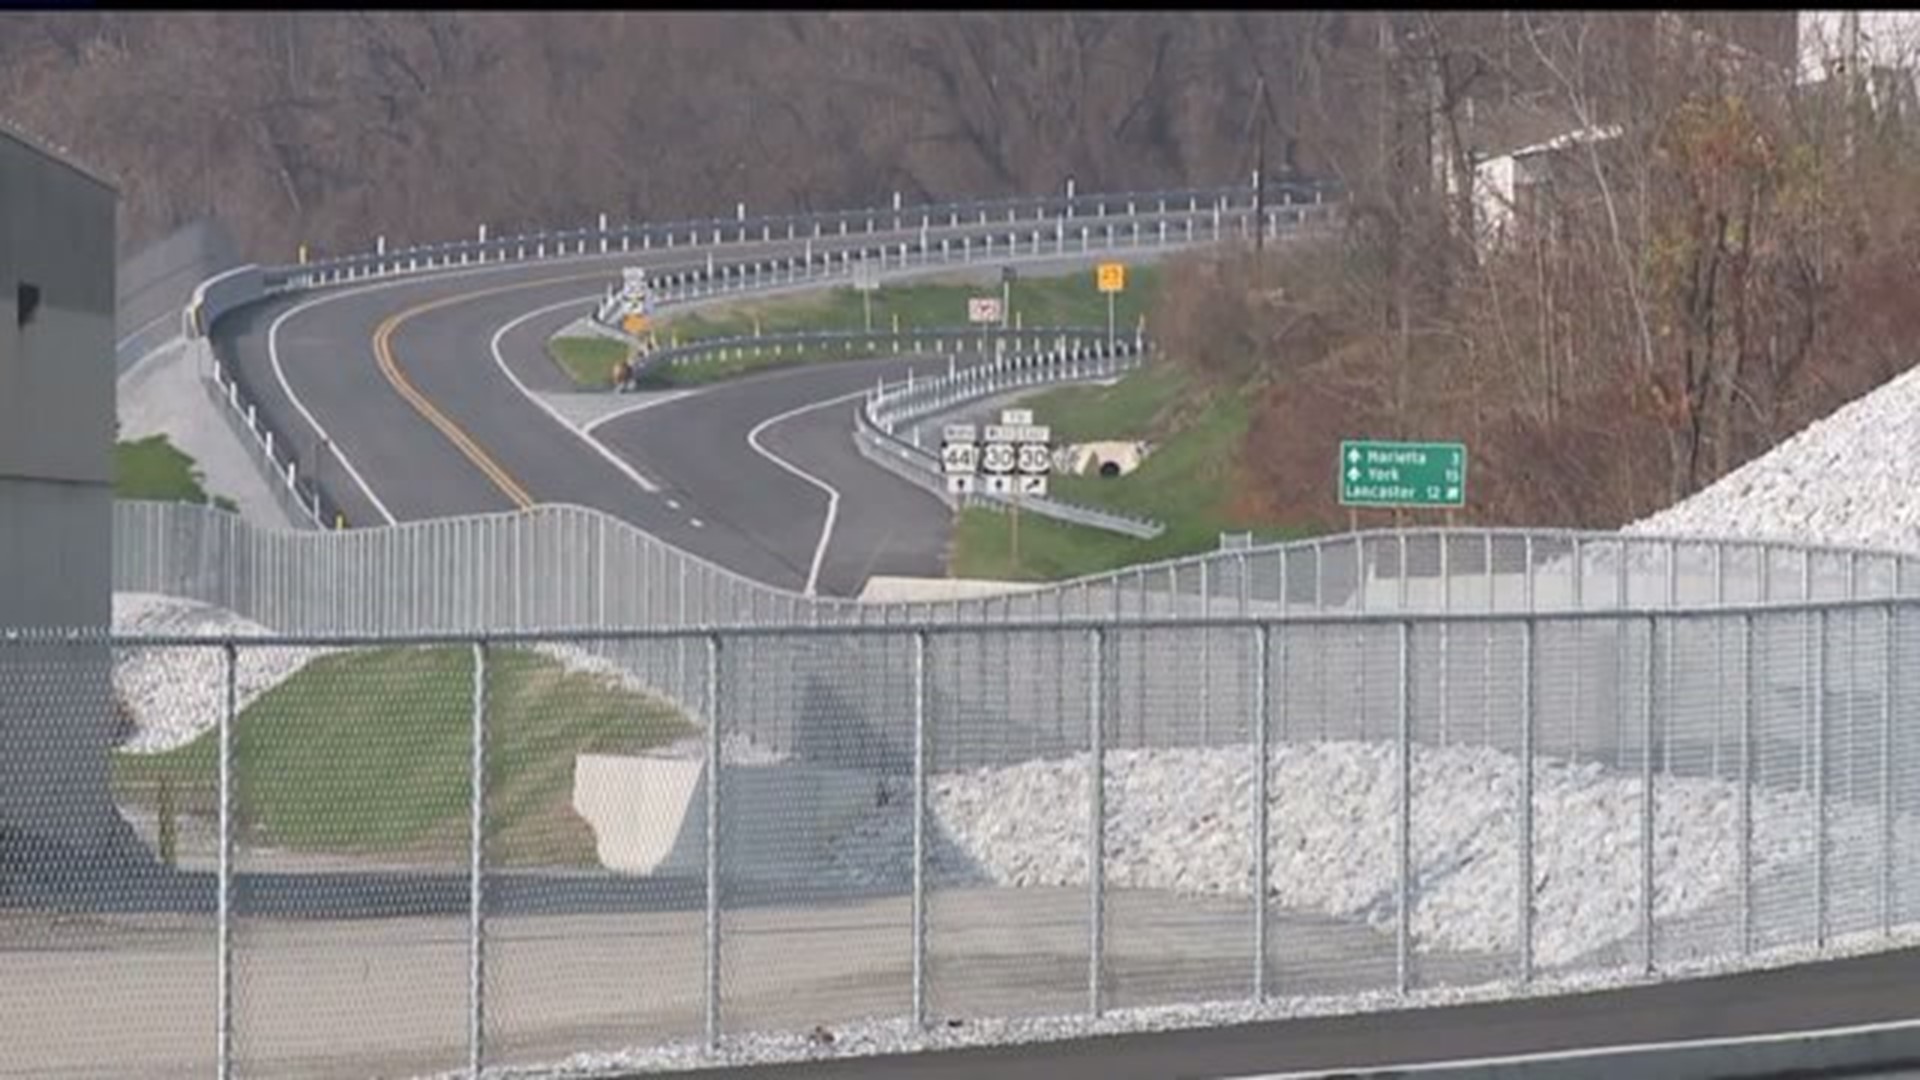 Columbia Rt 441 bypass problems